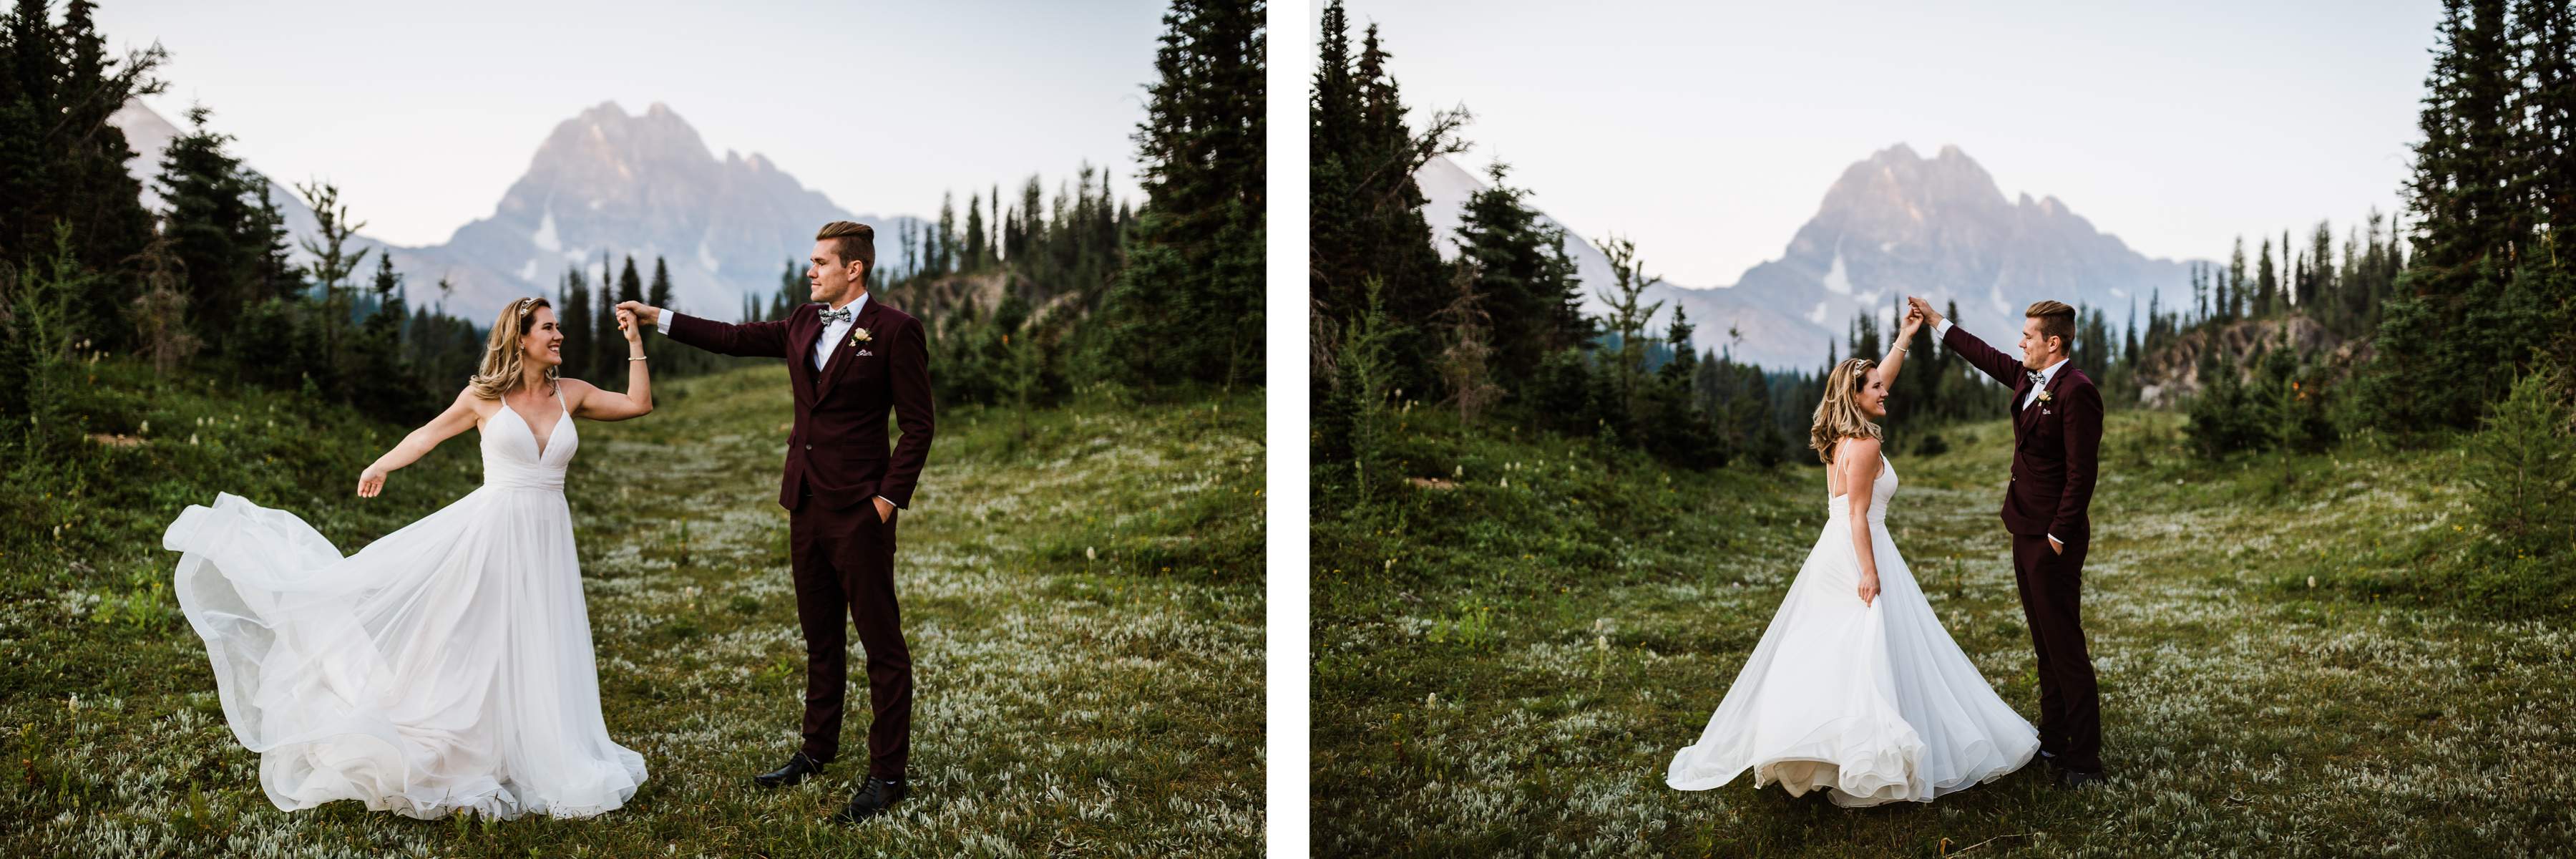 Banff Helicopter Elopement Photographers - Image 18